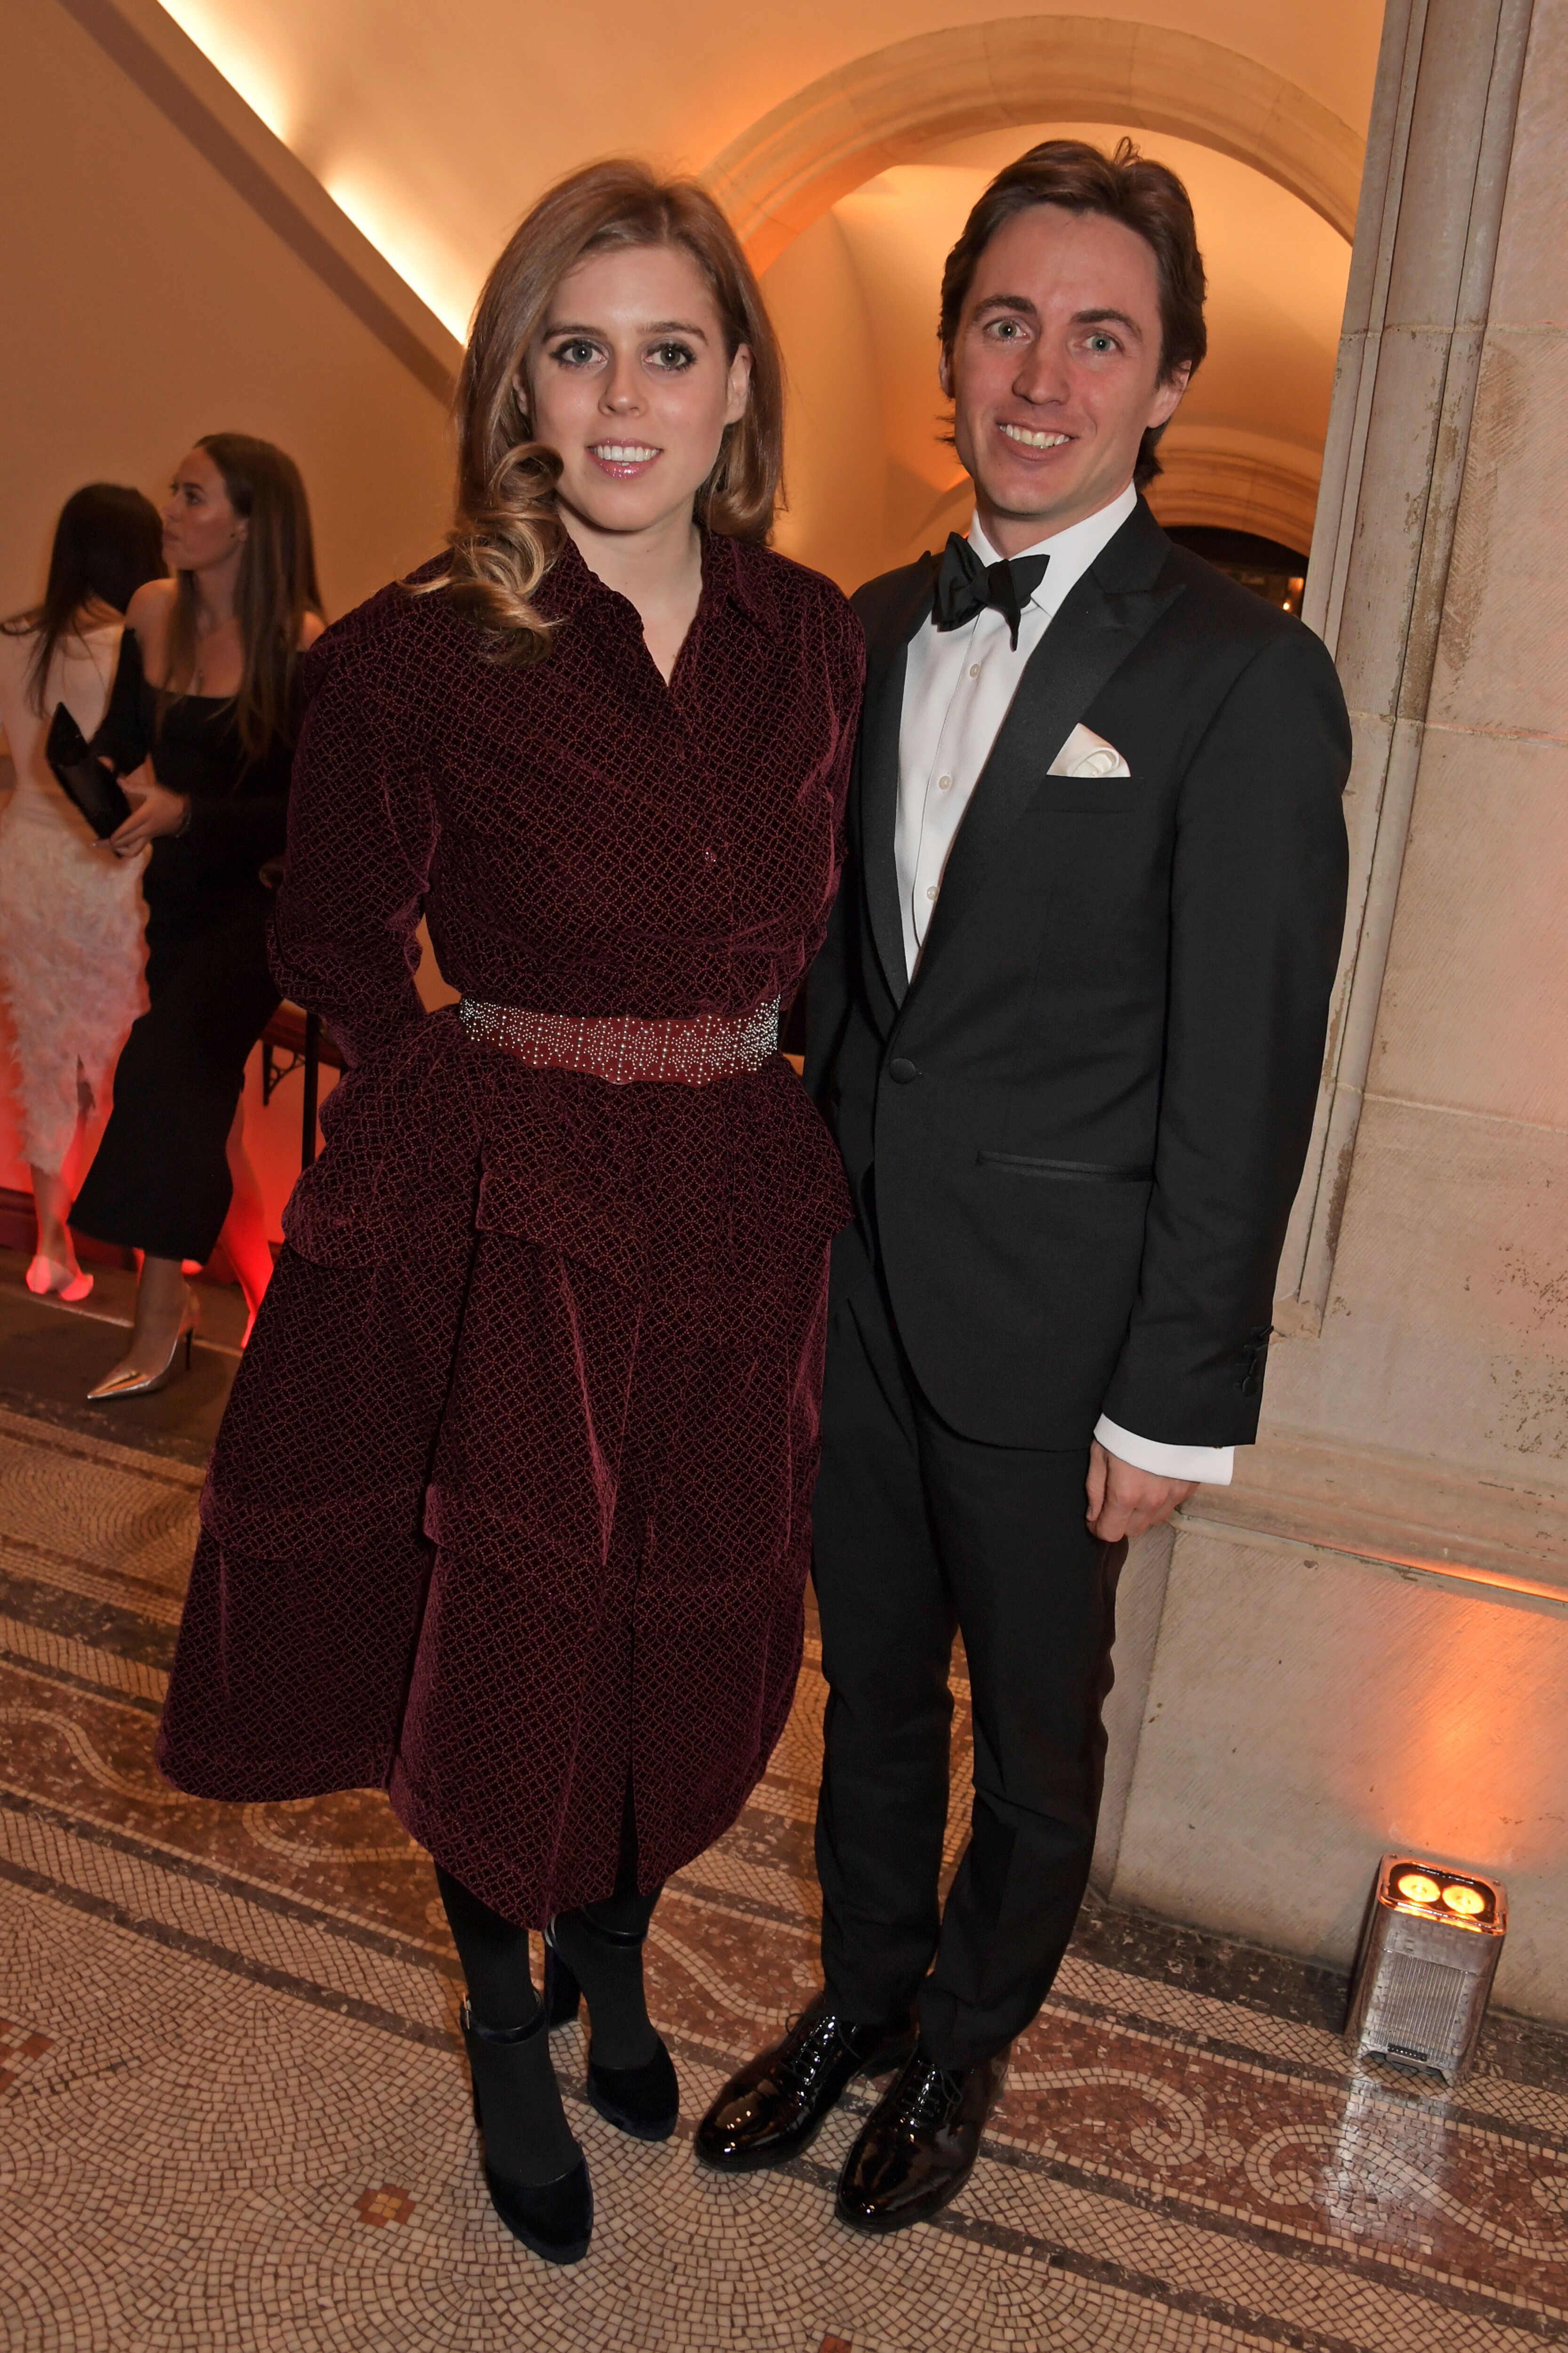 Princess Beatrice of York and Edoardo Mapelli Mozzi attend The Portrait Gala 2019 at the National Portrait Gallery. | Photo: Getty Images